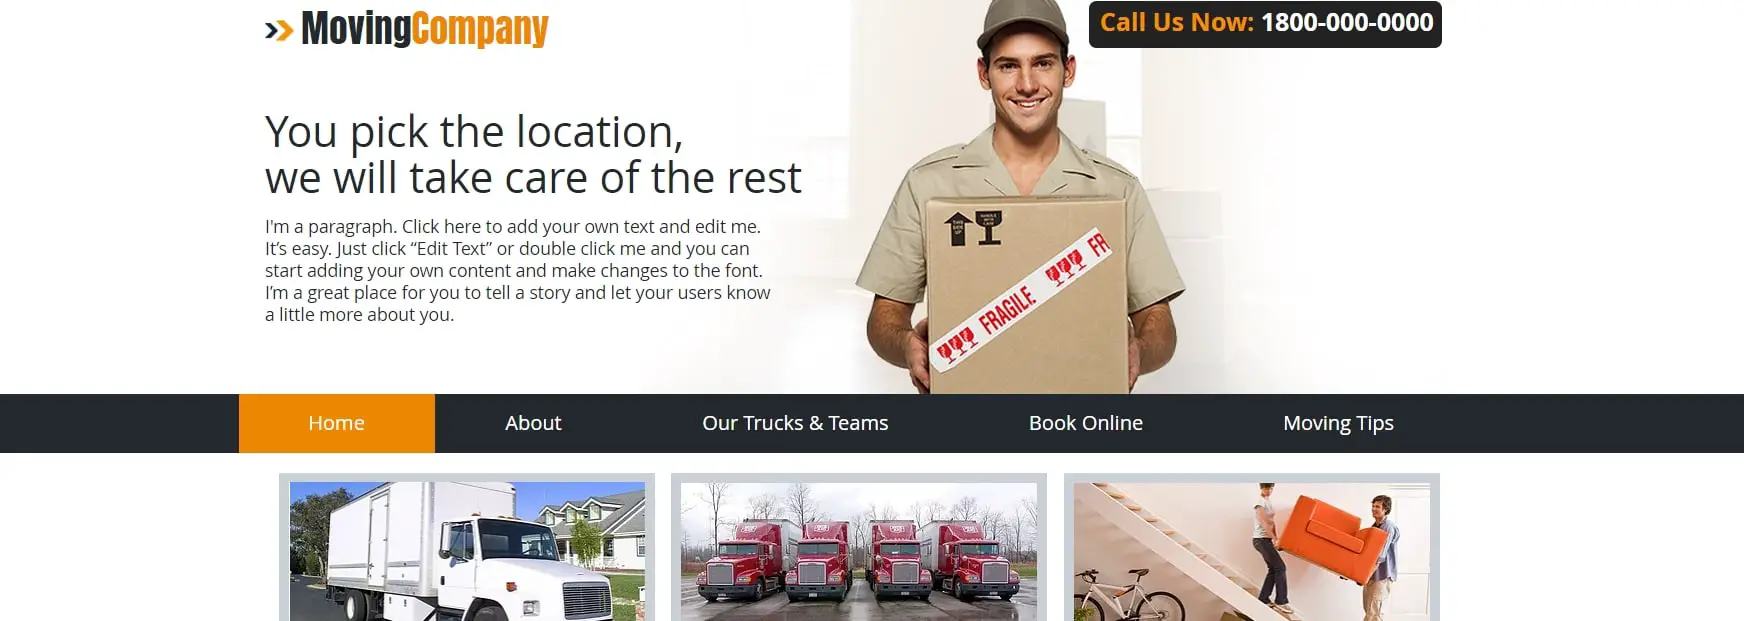 Moving Company Website Template _ WIX